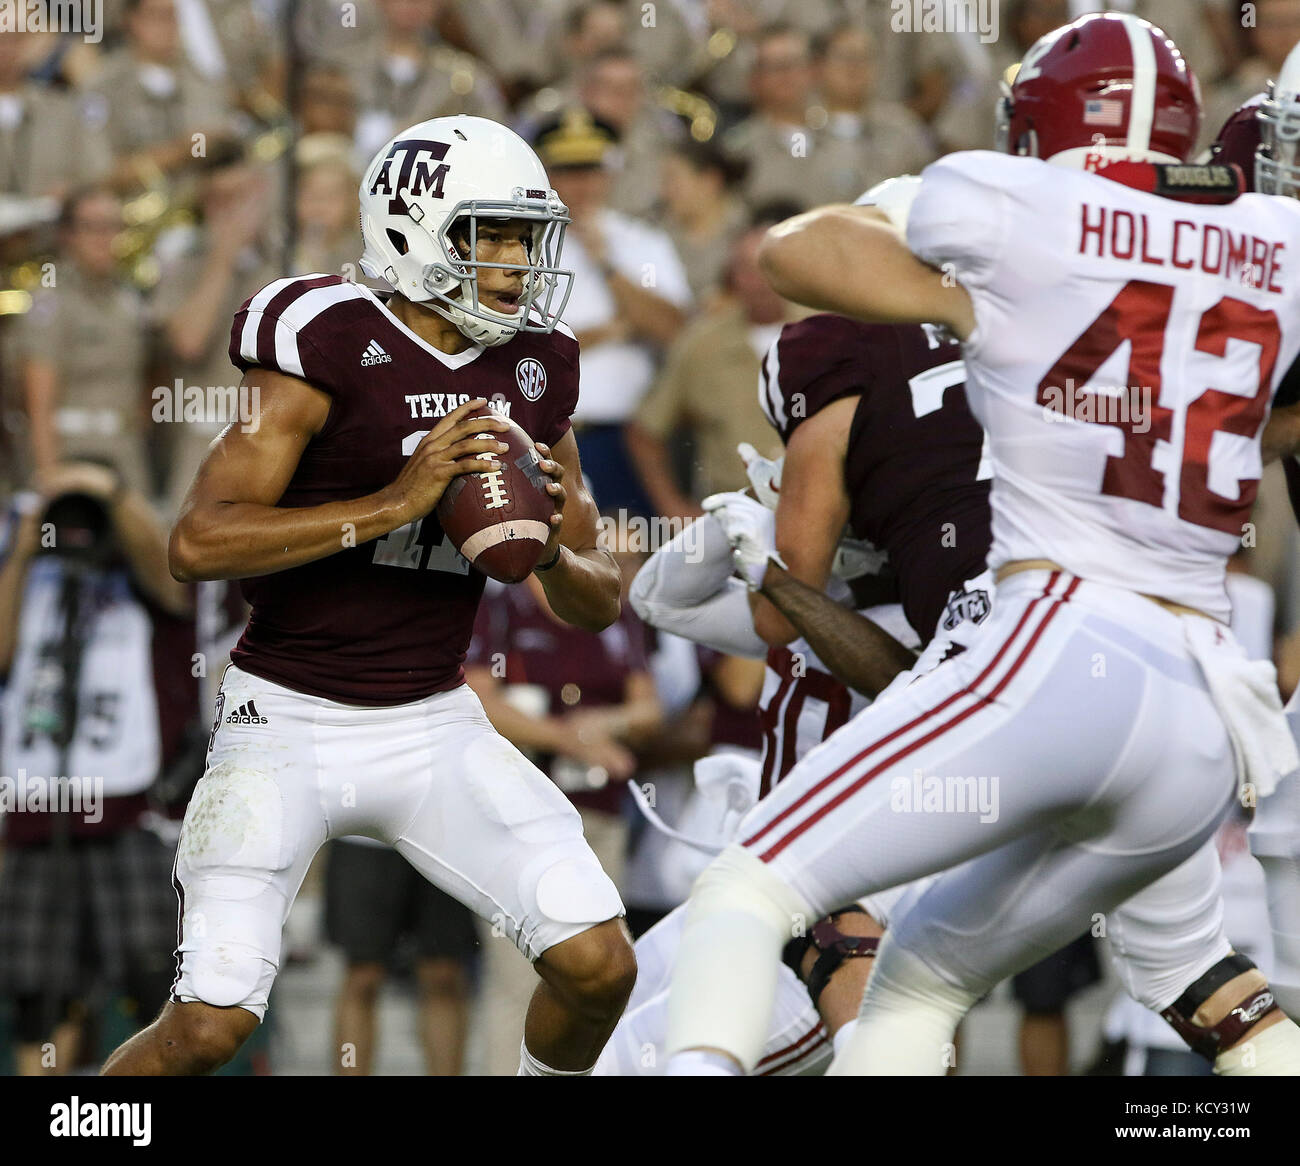 October 6, 2017: Texas A&M Aggies quarterback Kellen Mond (11) drops back to pass in the first quarter during the NCAA football game between the Alabama Crimson Tide and the Texas A&M Aggies at Kyle Field in College Station, TX; John Glaser/CSM. Stock Photo